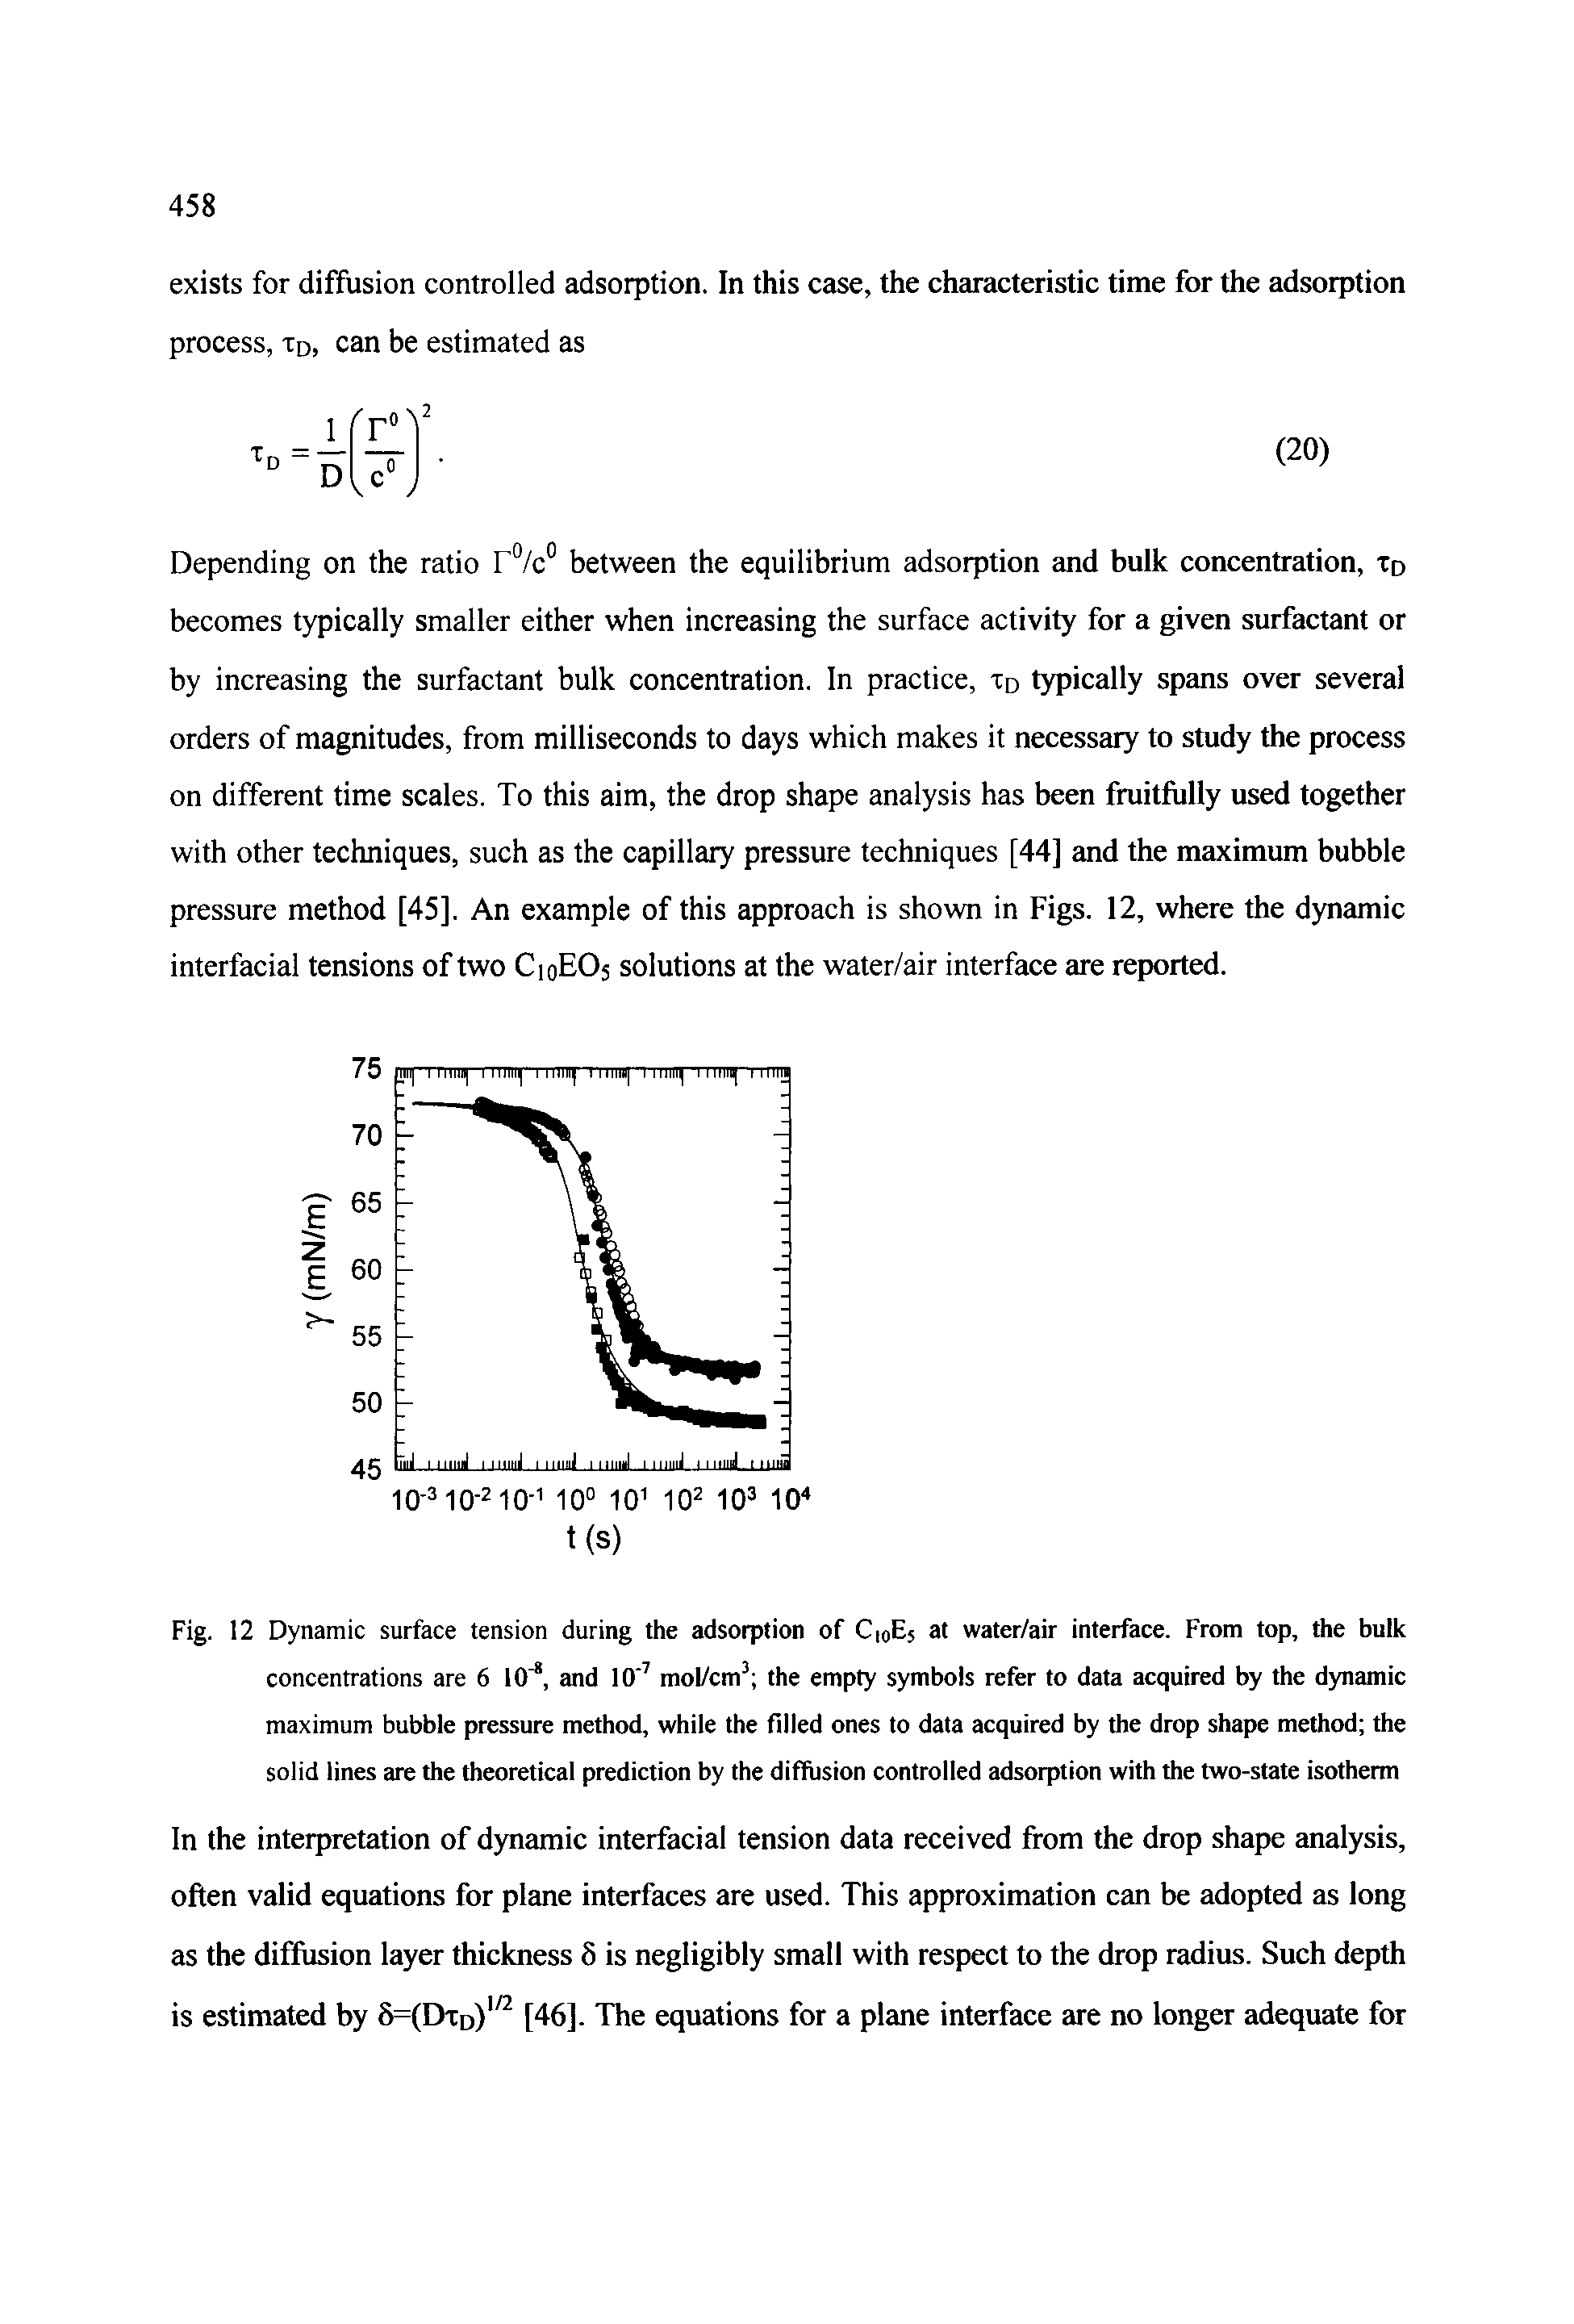 Fig. 12 Dynamic surface tension during the adsorption of C10E5 at water/air interface. From top, the bulk concentrations are 6 10", and lO mol/cm the empty symbols refer to data acquired by the dynamic maximum bubble pressure method, while the filled ones to data acquired by the drop shape method the solid lines are the theoretical prediction by the diffusion controlled adsorption with the two-state isotherm...